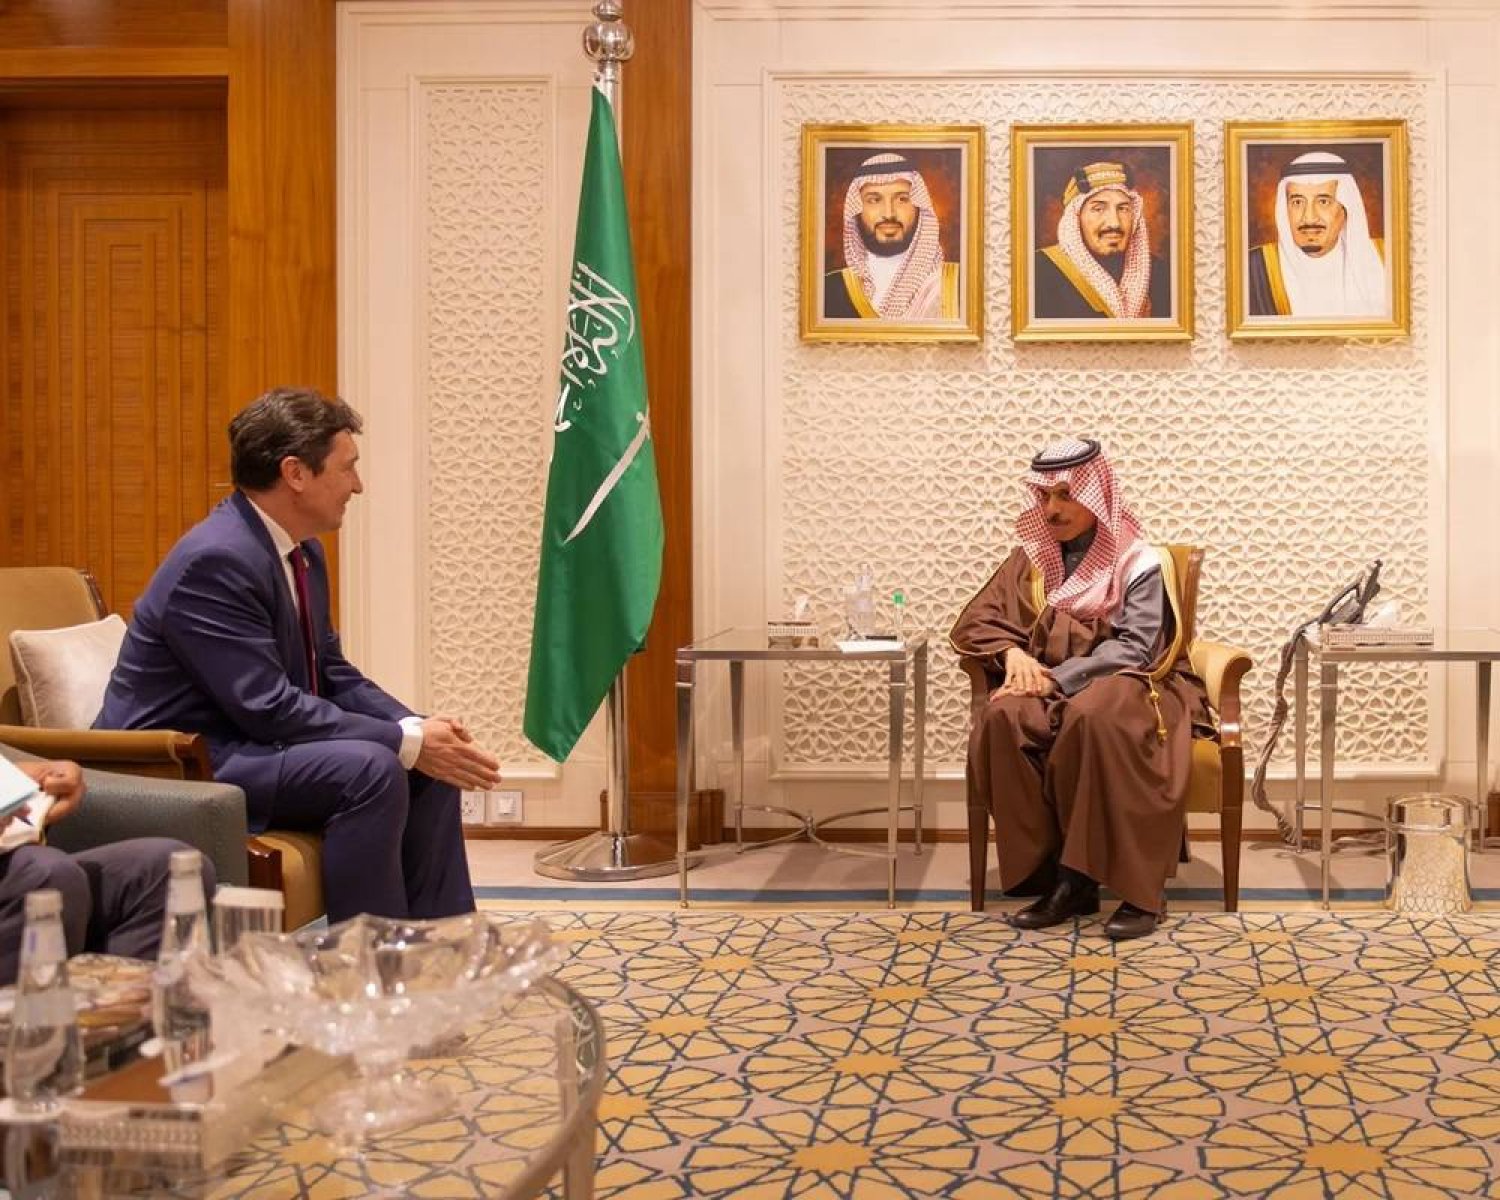 Saudi Foreign Minister Prince Faisal bin Farhan bin Abdullah meets with Vice-President of the Foreign Affairs, Defense and Armed Forces Committee and the President of the France-Gulf States Inter-Parliamentary Friendship Group of the French Senate Olivier Cadic in Riyadh on Monday. (SPA)